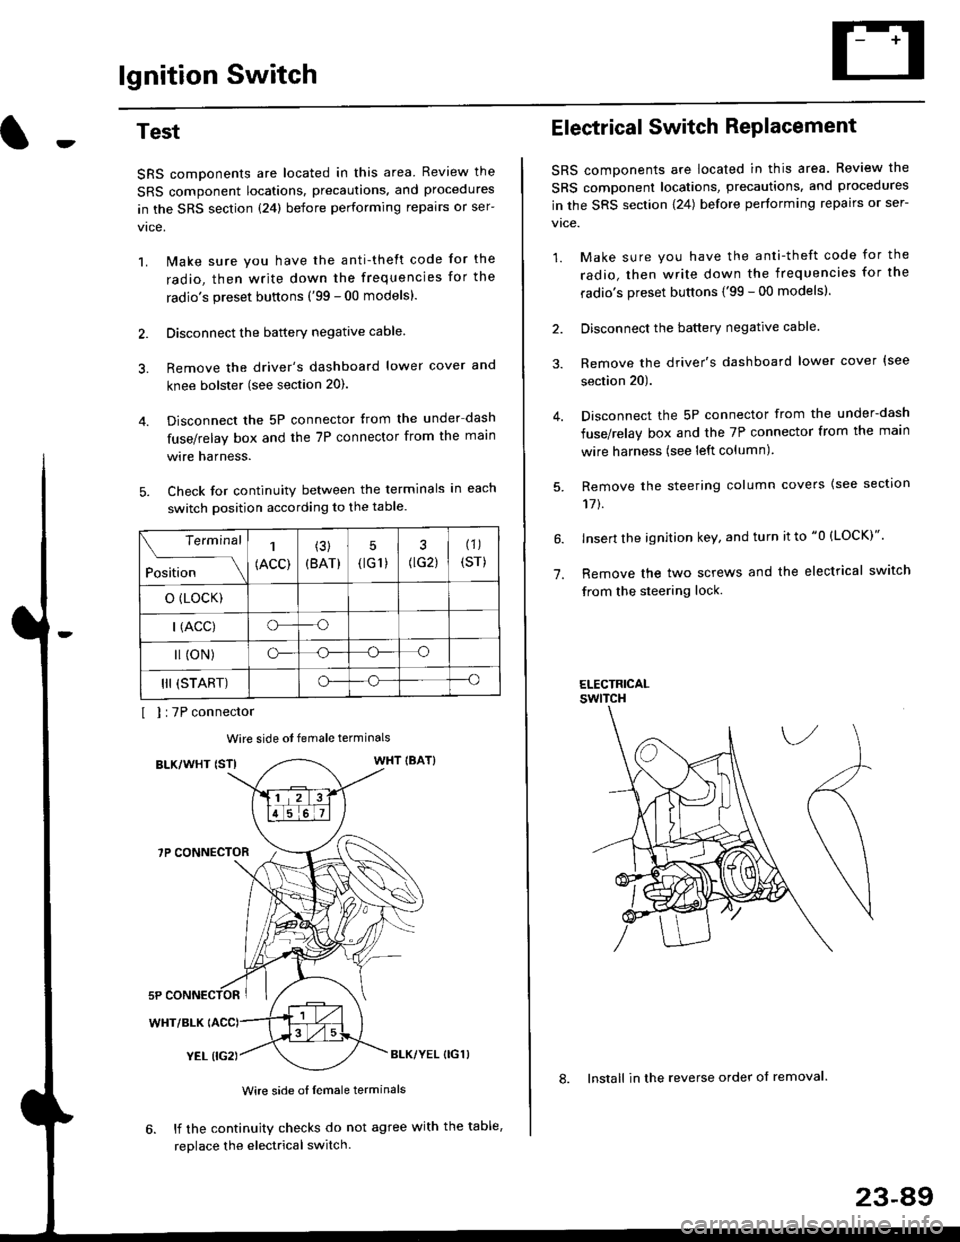 HONDA CIVIC 1999 6.G Workshop Manual lgnition Switch
4.
Test
SRS components are located in this area Review the
SRS component locations. precautions. and procedures
in the SRS section {24} before performing repairs or ser-
1. i/ake sure 